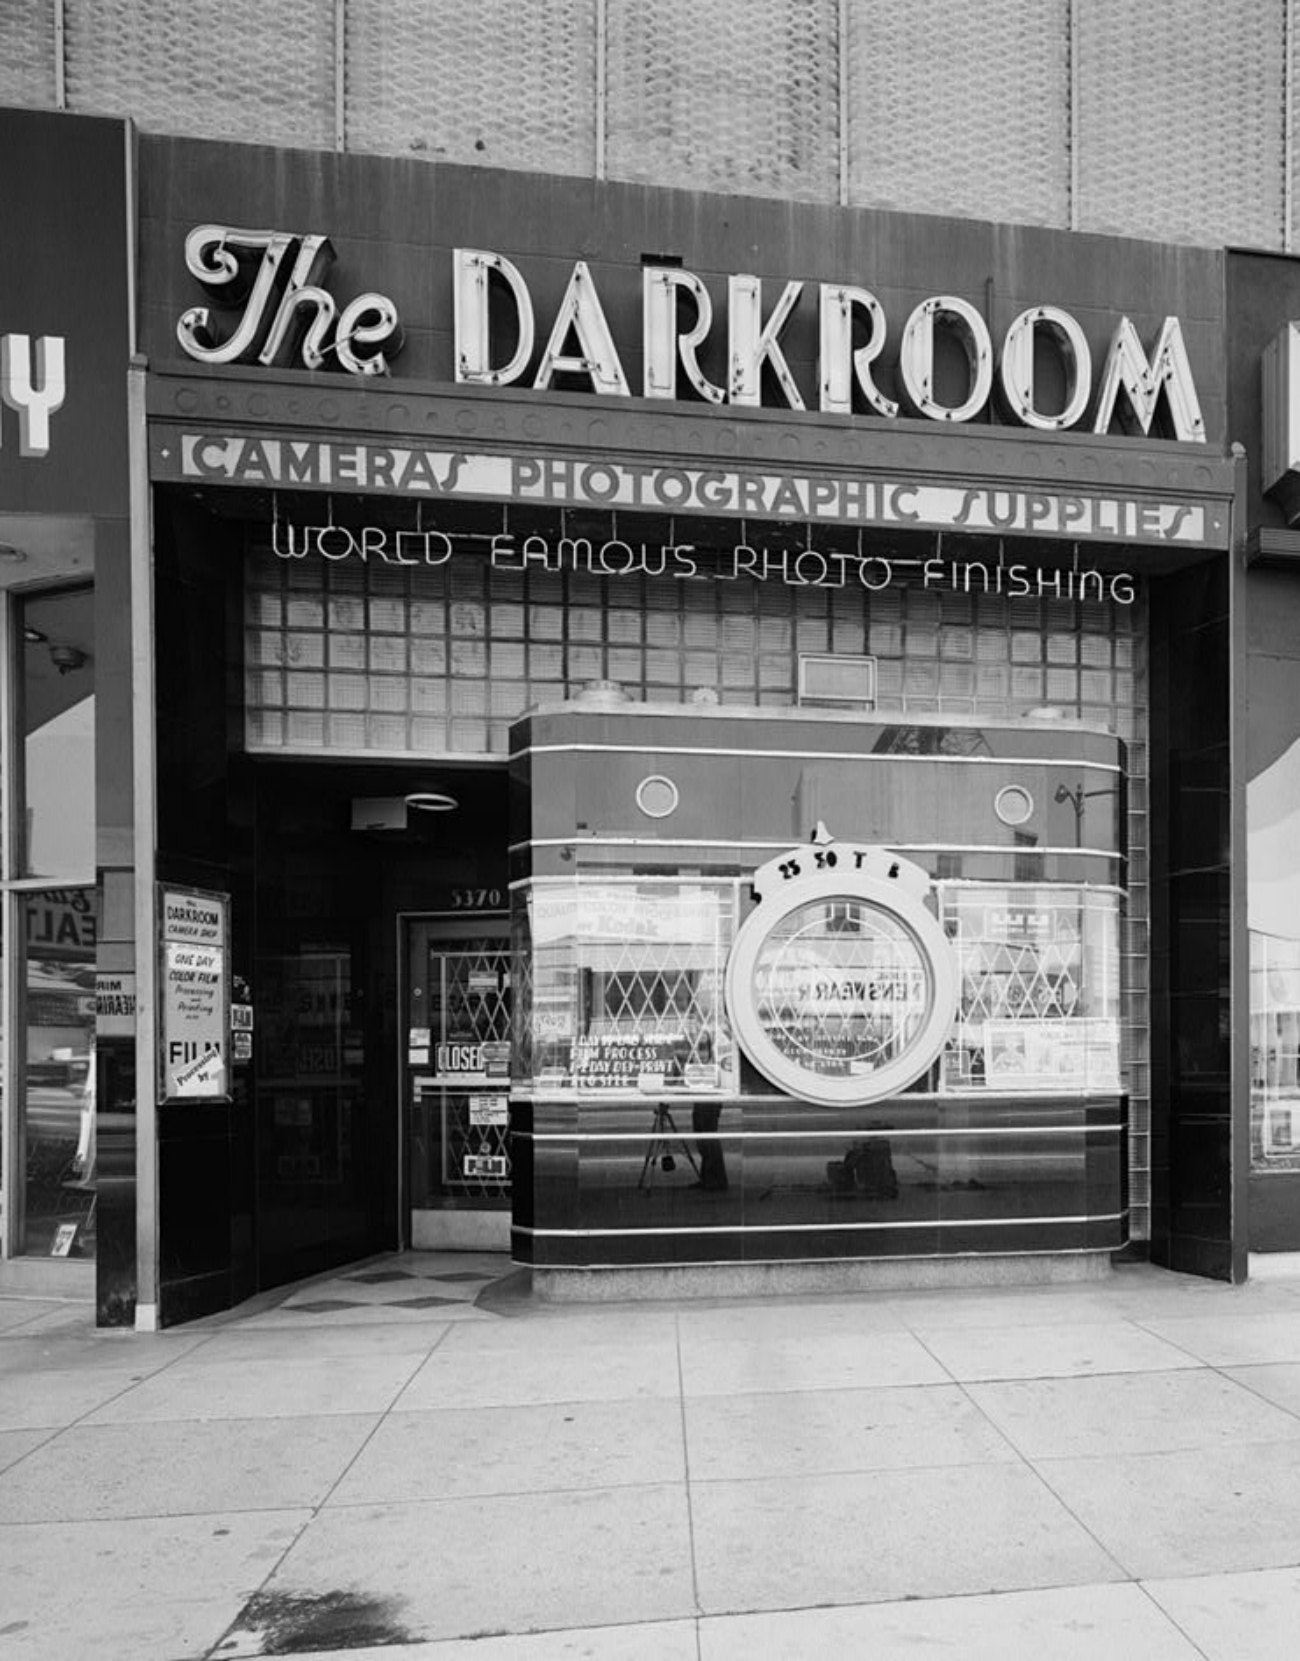 The Darkroom photographed in the 1970s